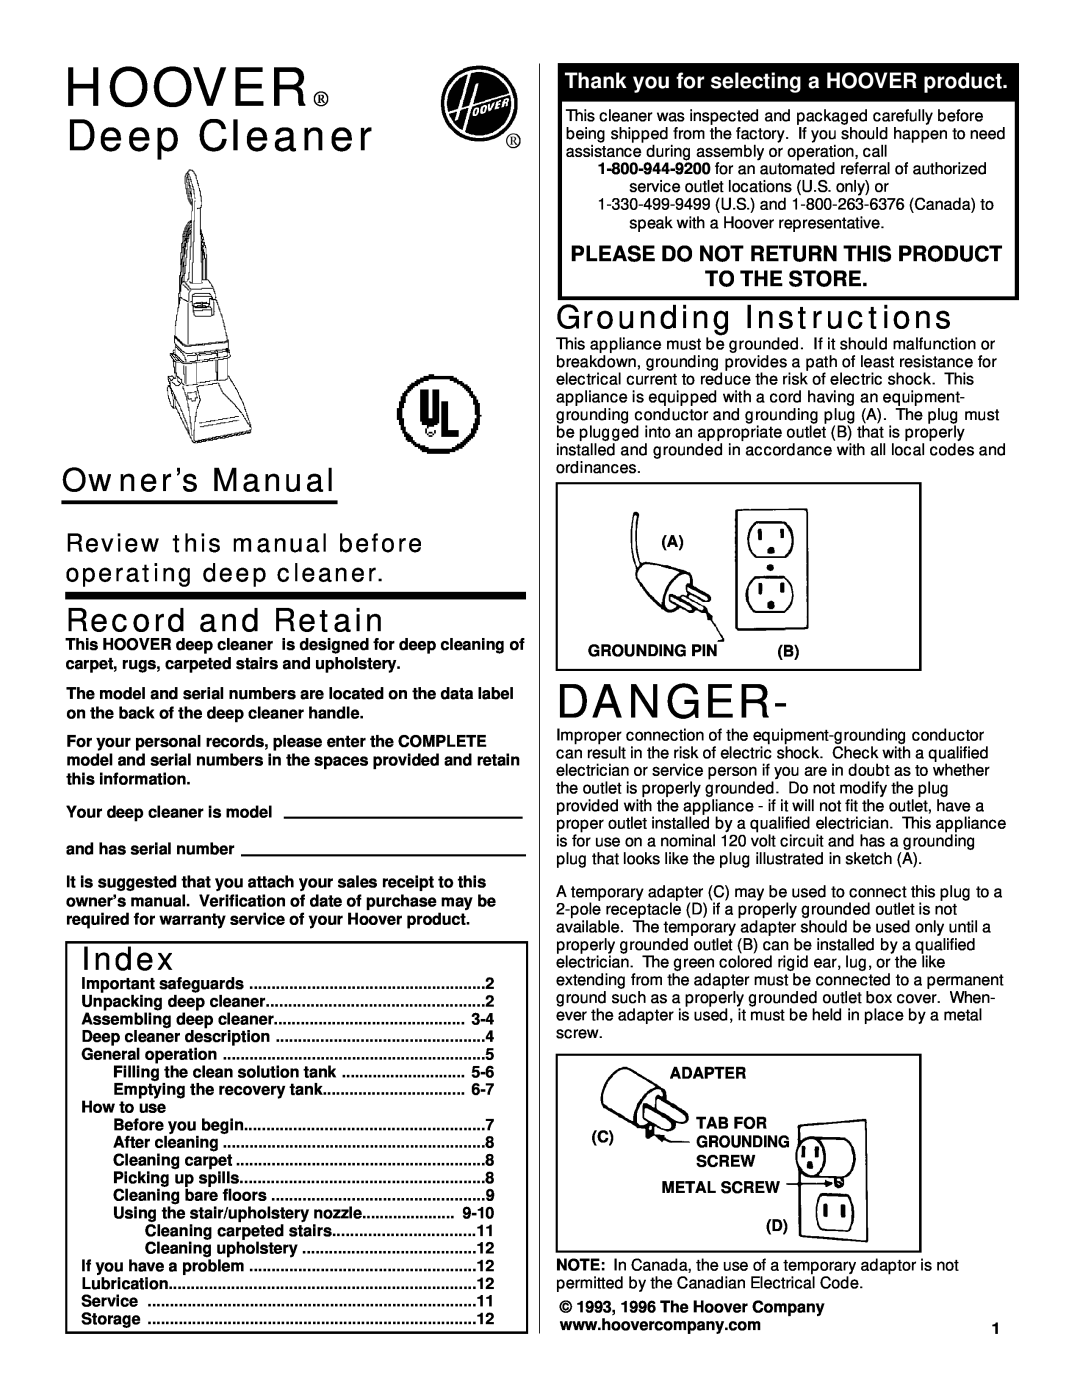 Hoover Deep Cleaner owner manual Hoover, Owner’s Manual, Record and Retain, Index, Grounding Instructions, Danger 